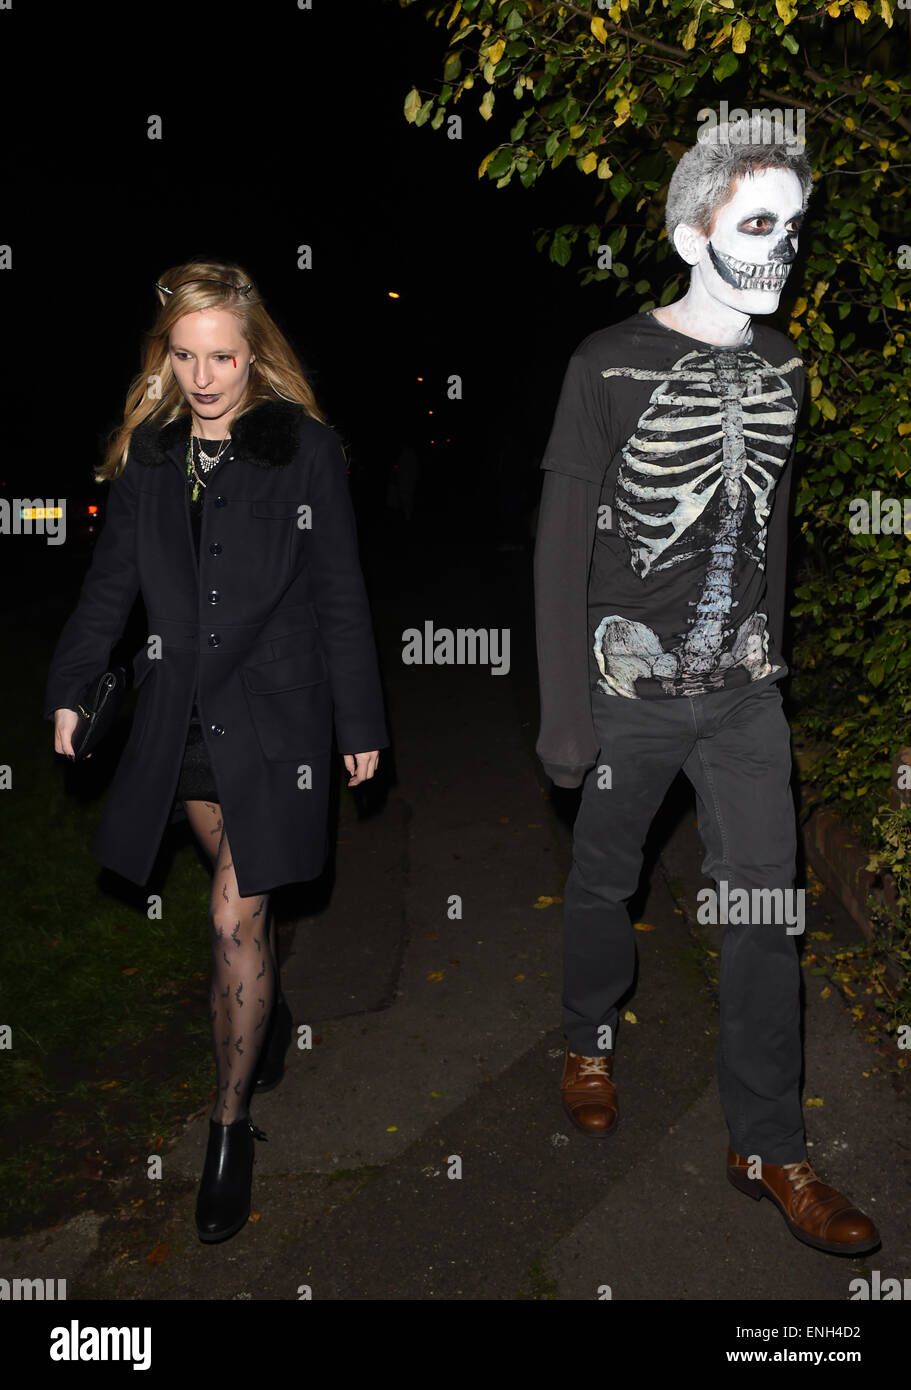 Jonathan Ross Halloween Party Arrivals Featuring Guest Where London United Kingdom When